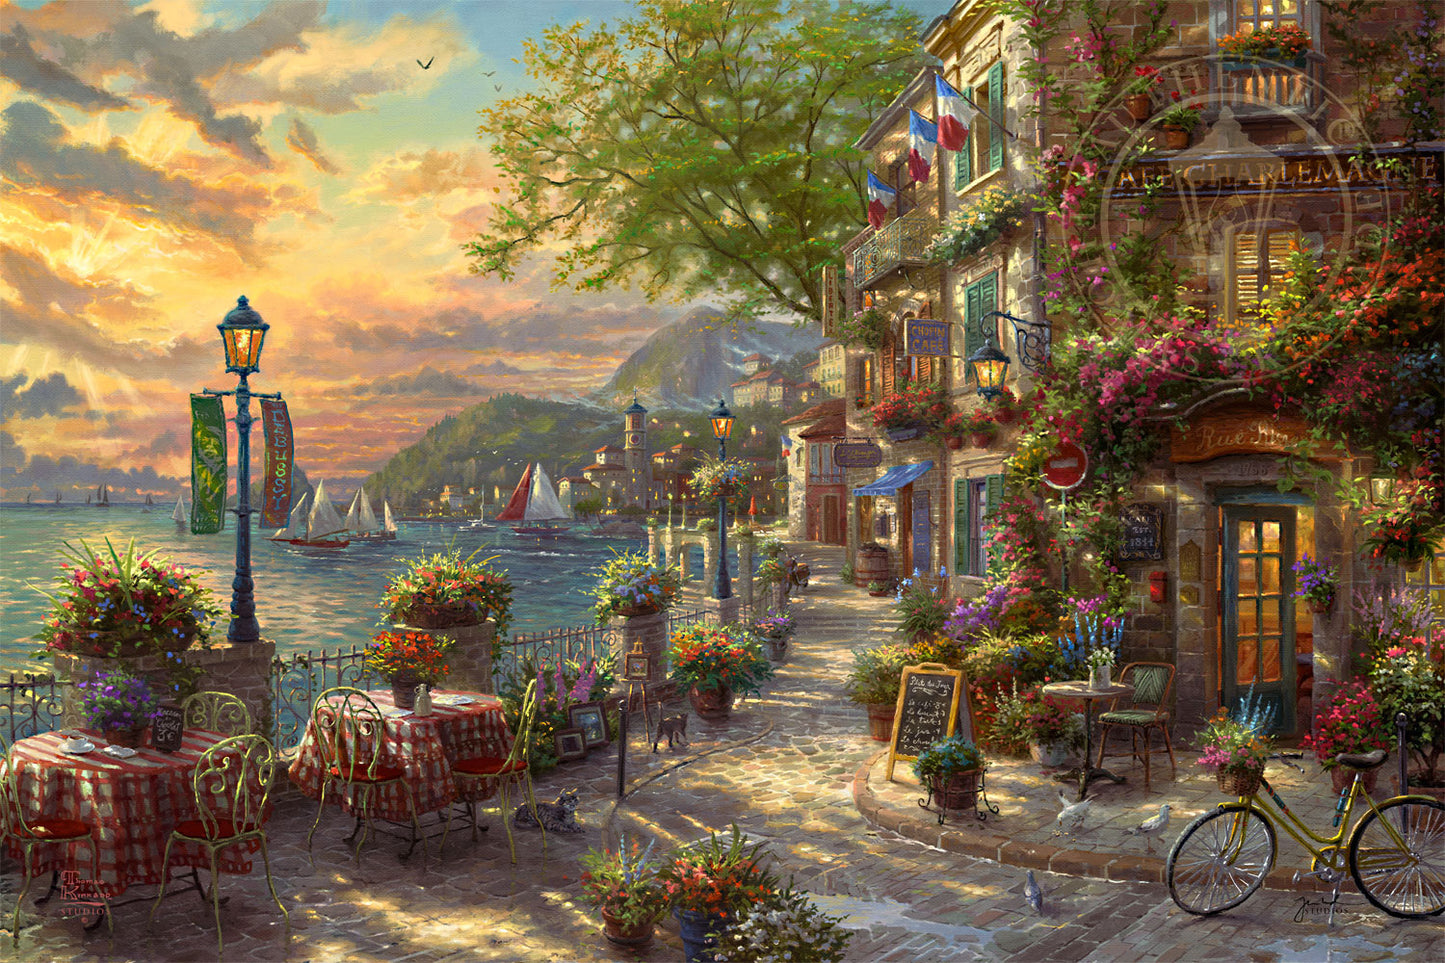 Thomas Kinkade Studios "French Riviera Café" Limited and Open Edition Canvas